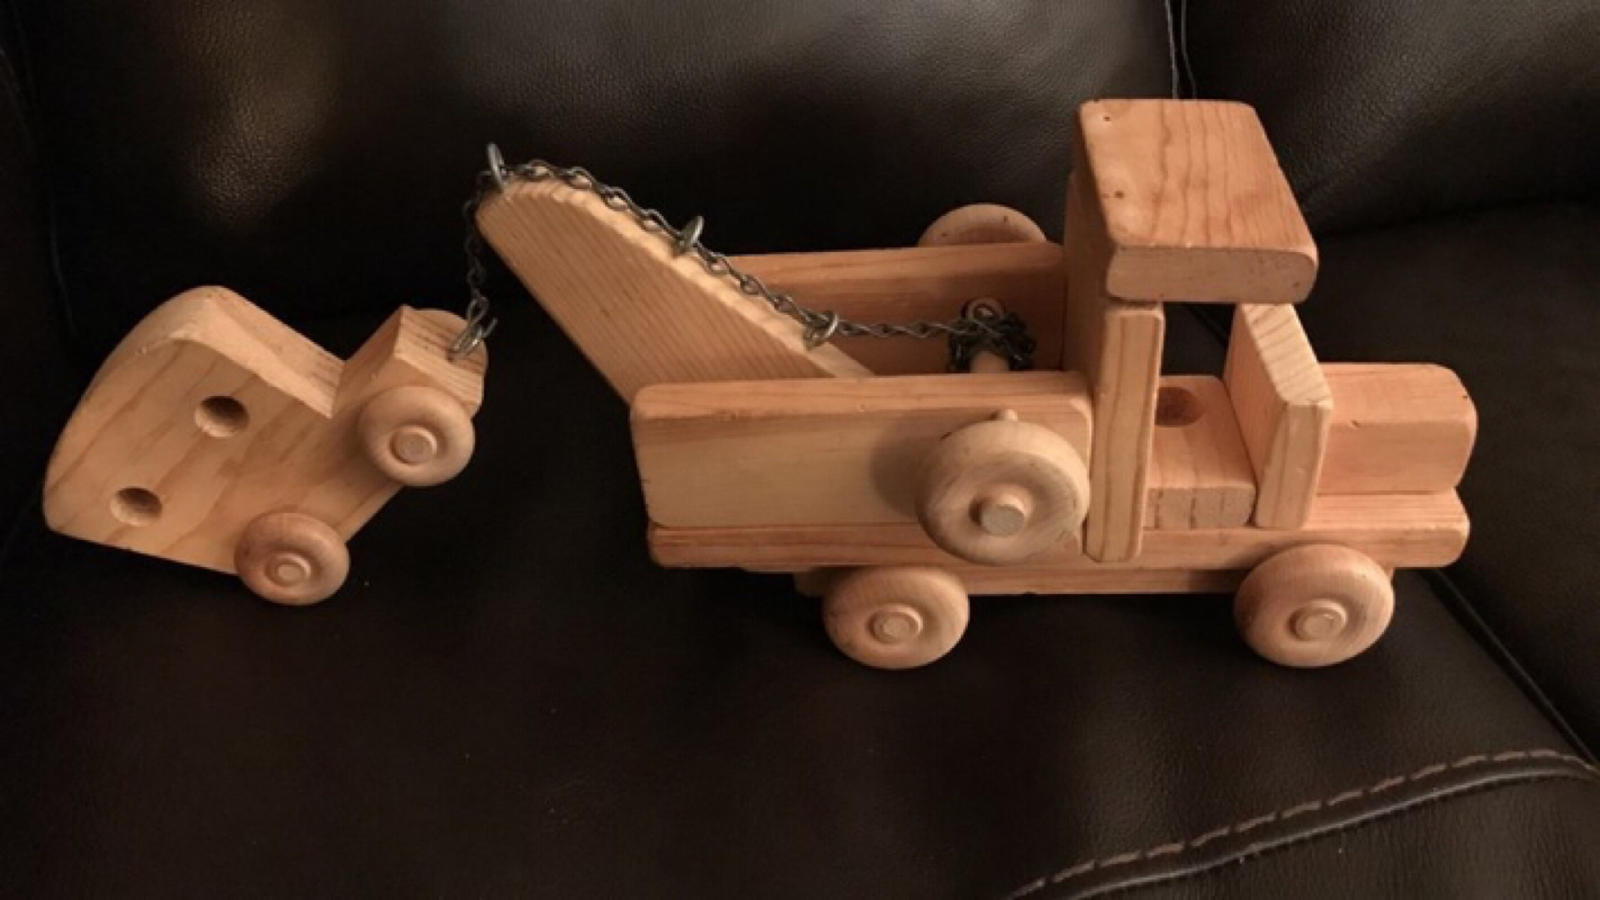 toy tow truck with working winch